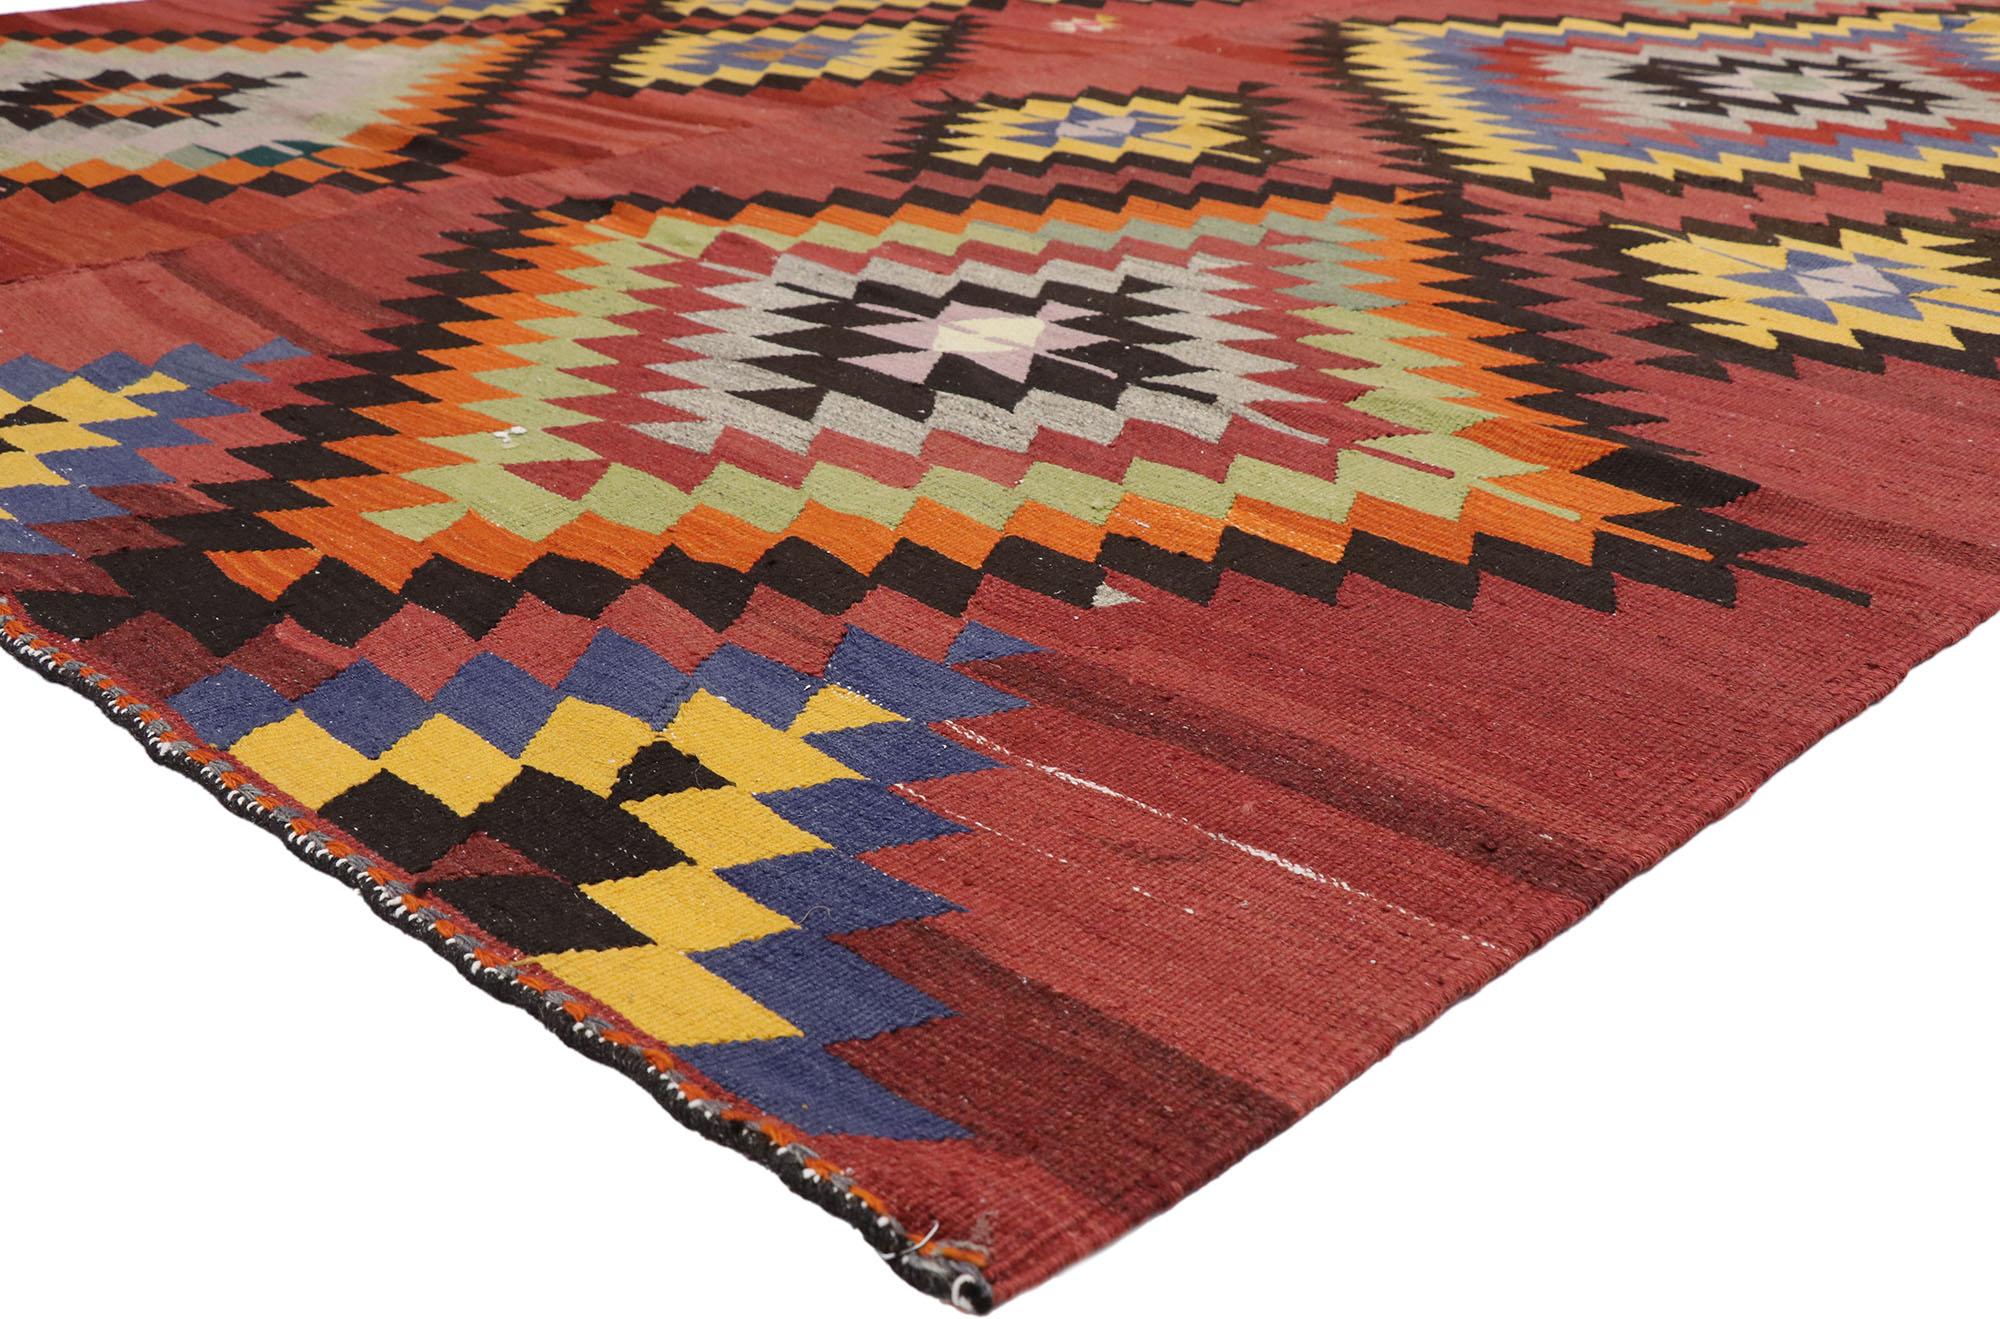 52729 distressed vintage Turkish Kilim Area rug with Aztec Southwest Navajo style. With bold geometric forms, vibrant colors and Aztec flair, this hand woven wool vintage Turkish Kilim area rug manages to beautifully meld contemporary design with